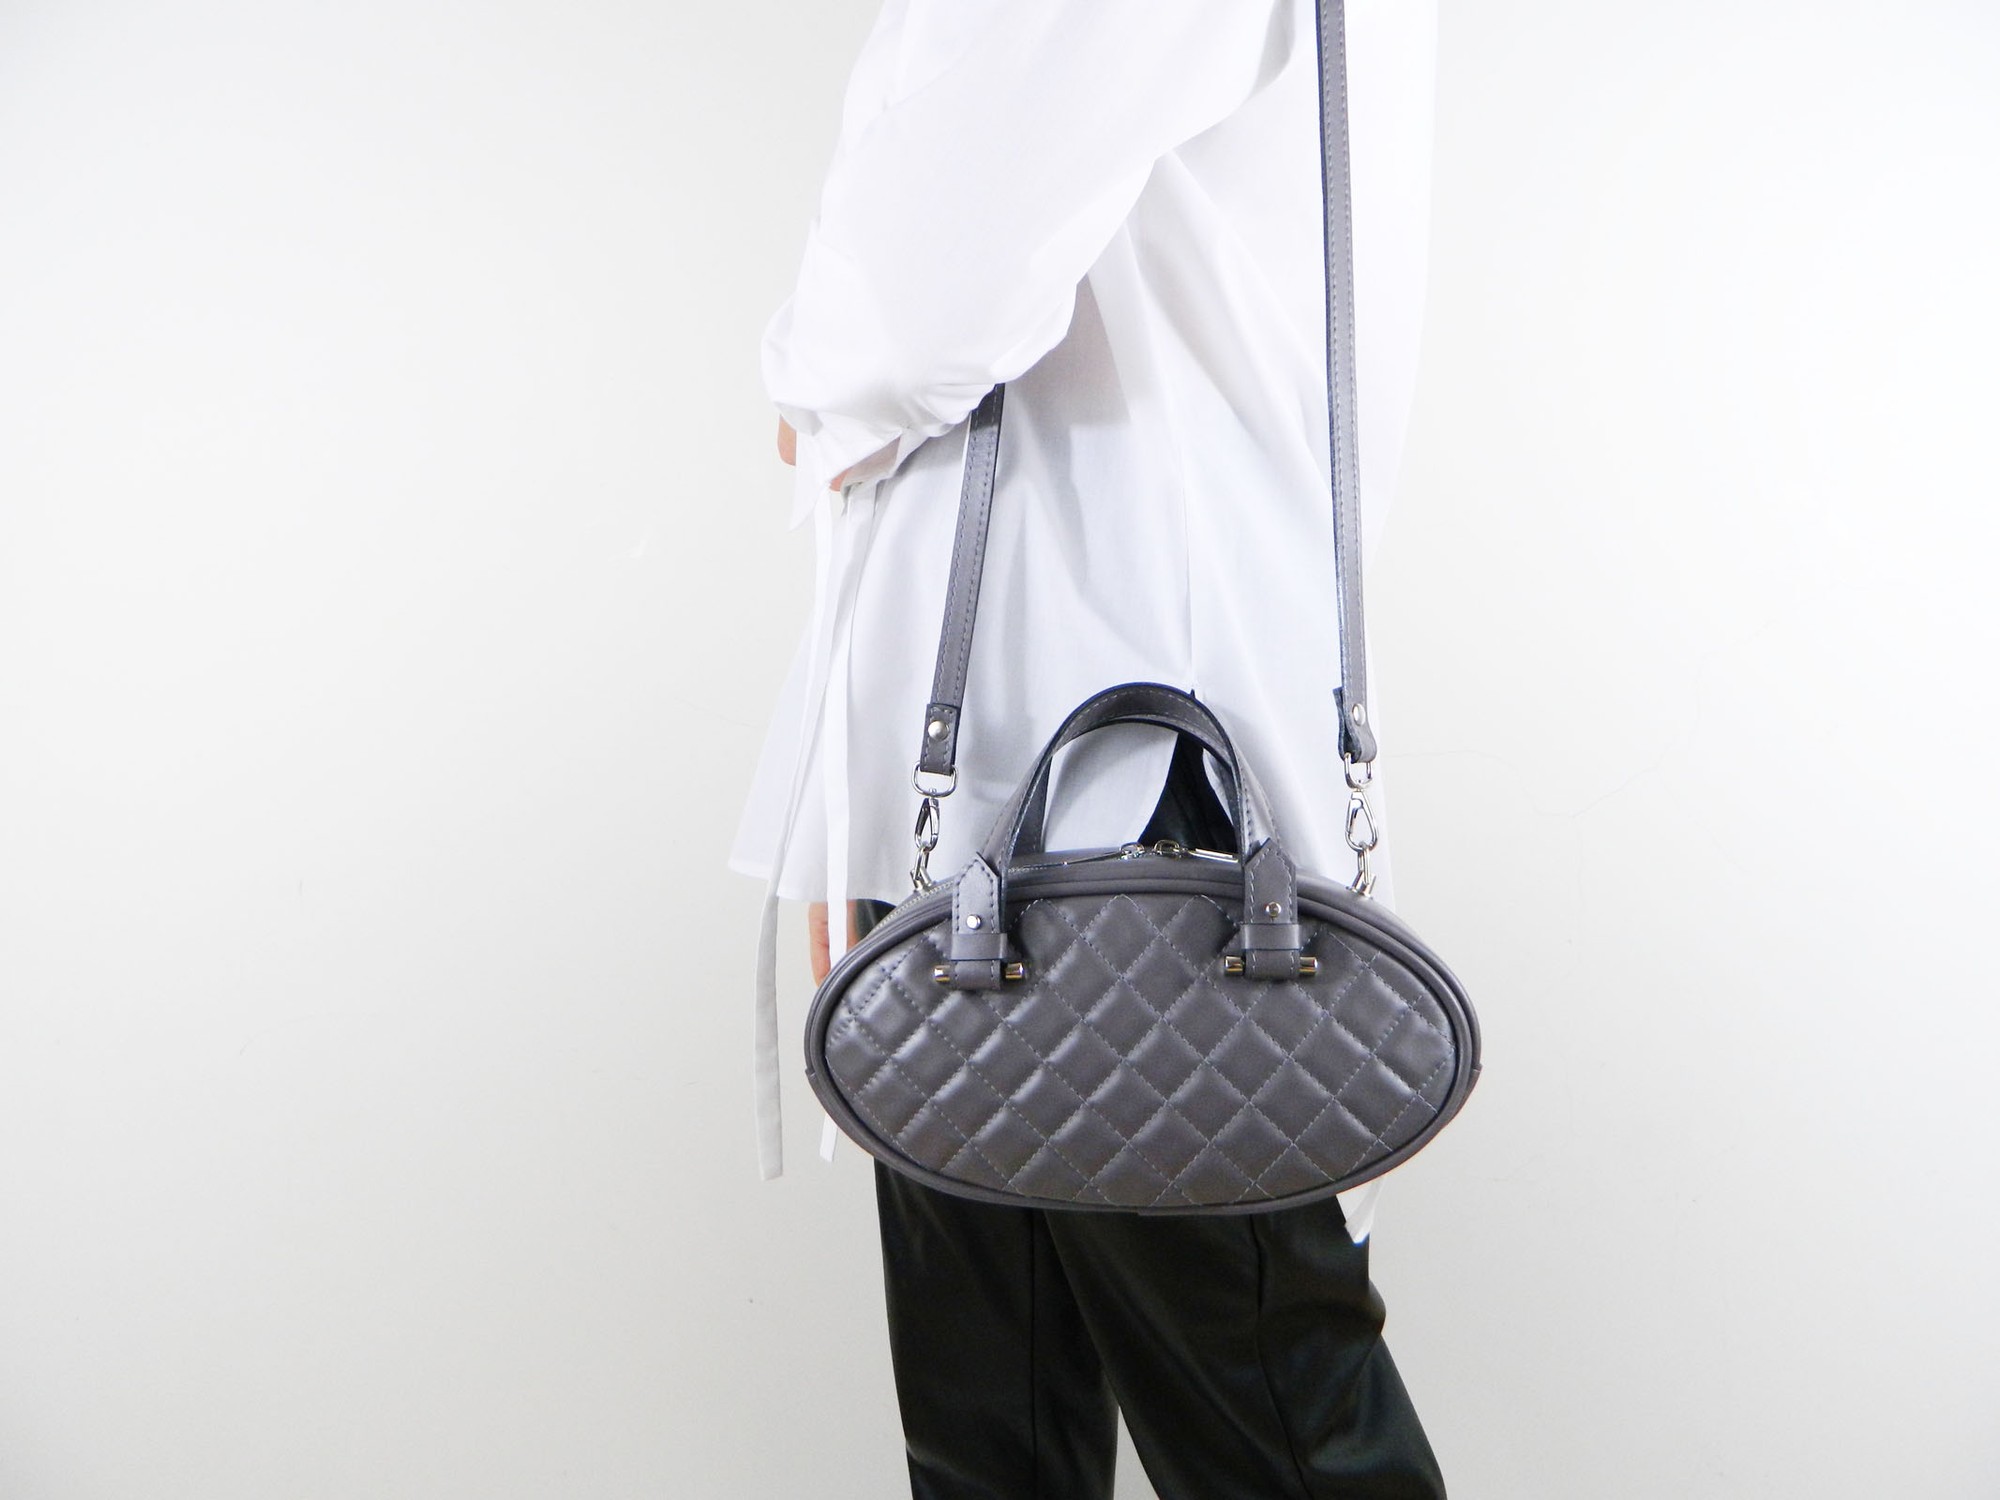 Leather bag – "Balle"